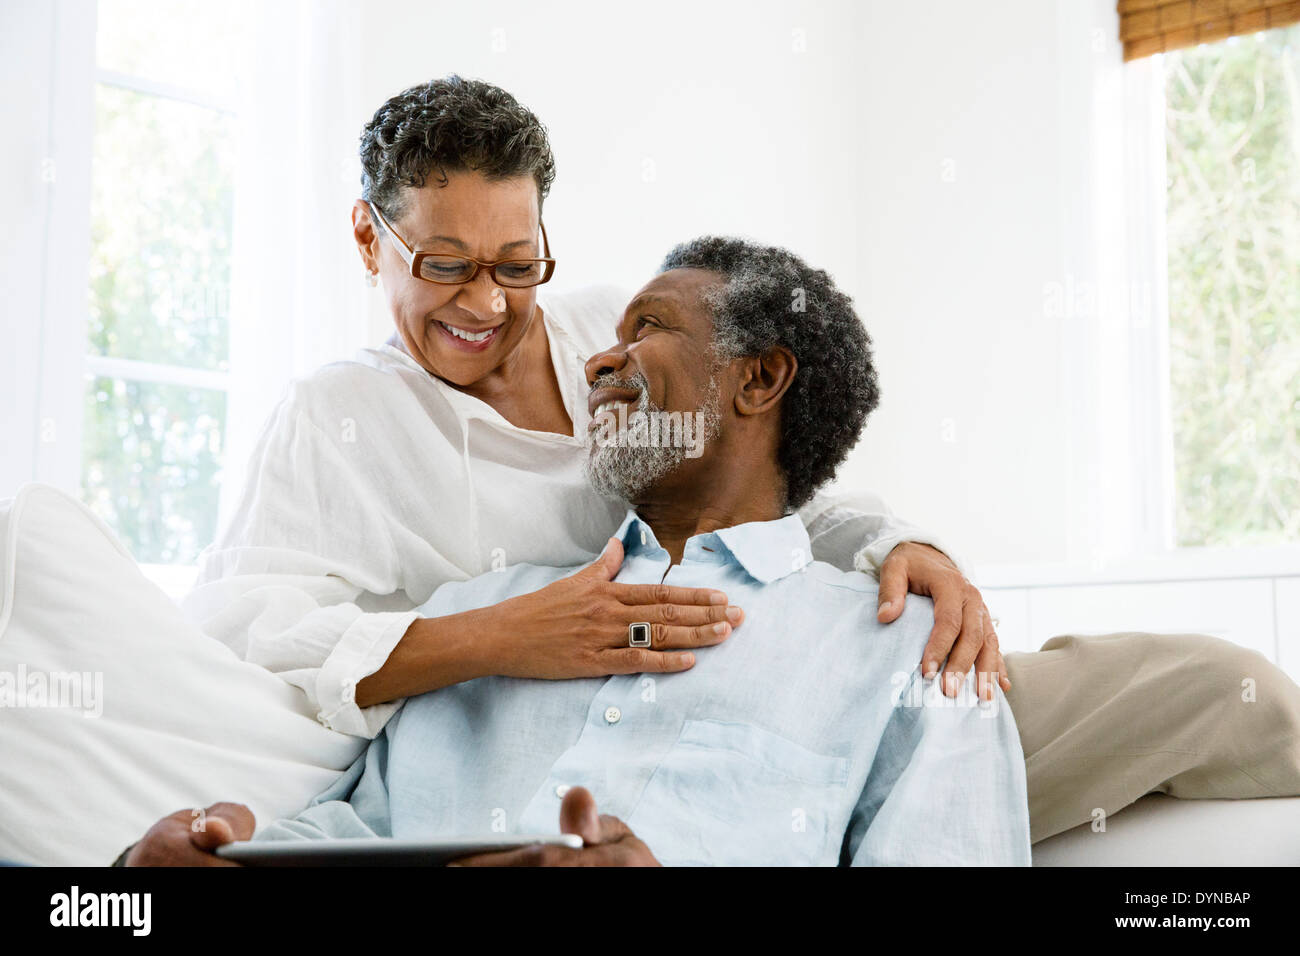 Senior couple relaxing in living room Banque D'Images